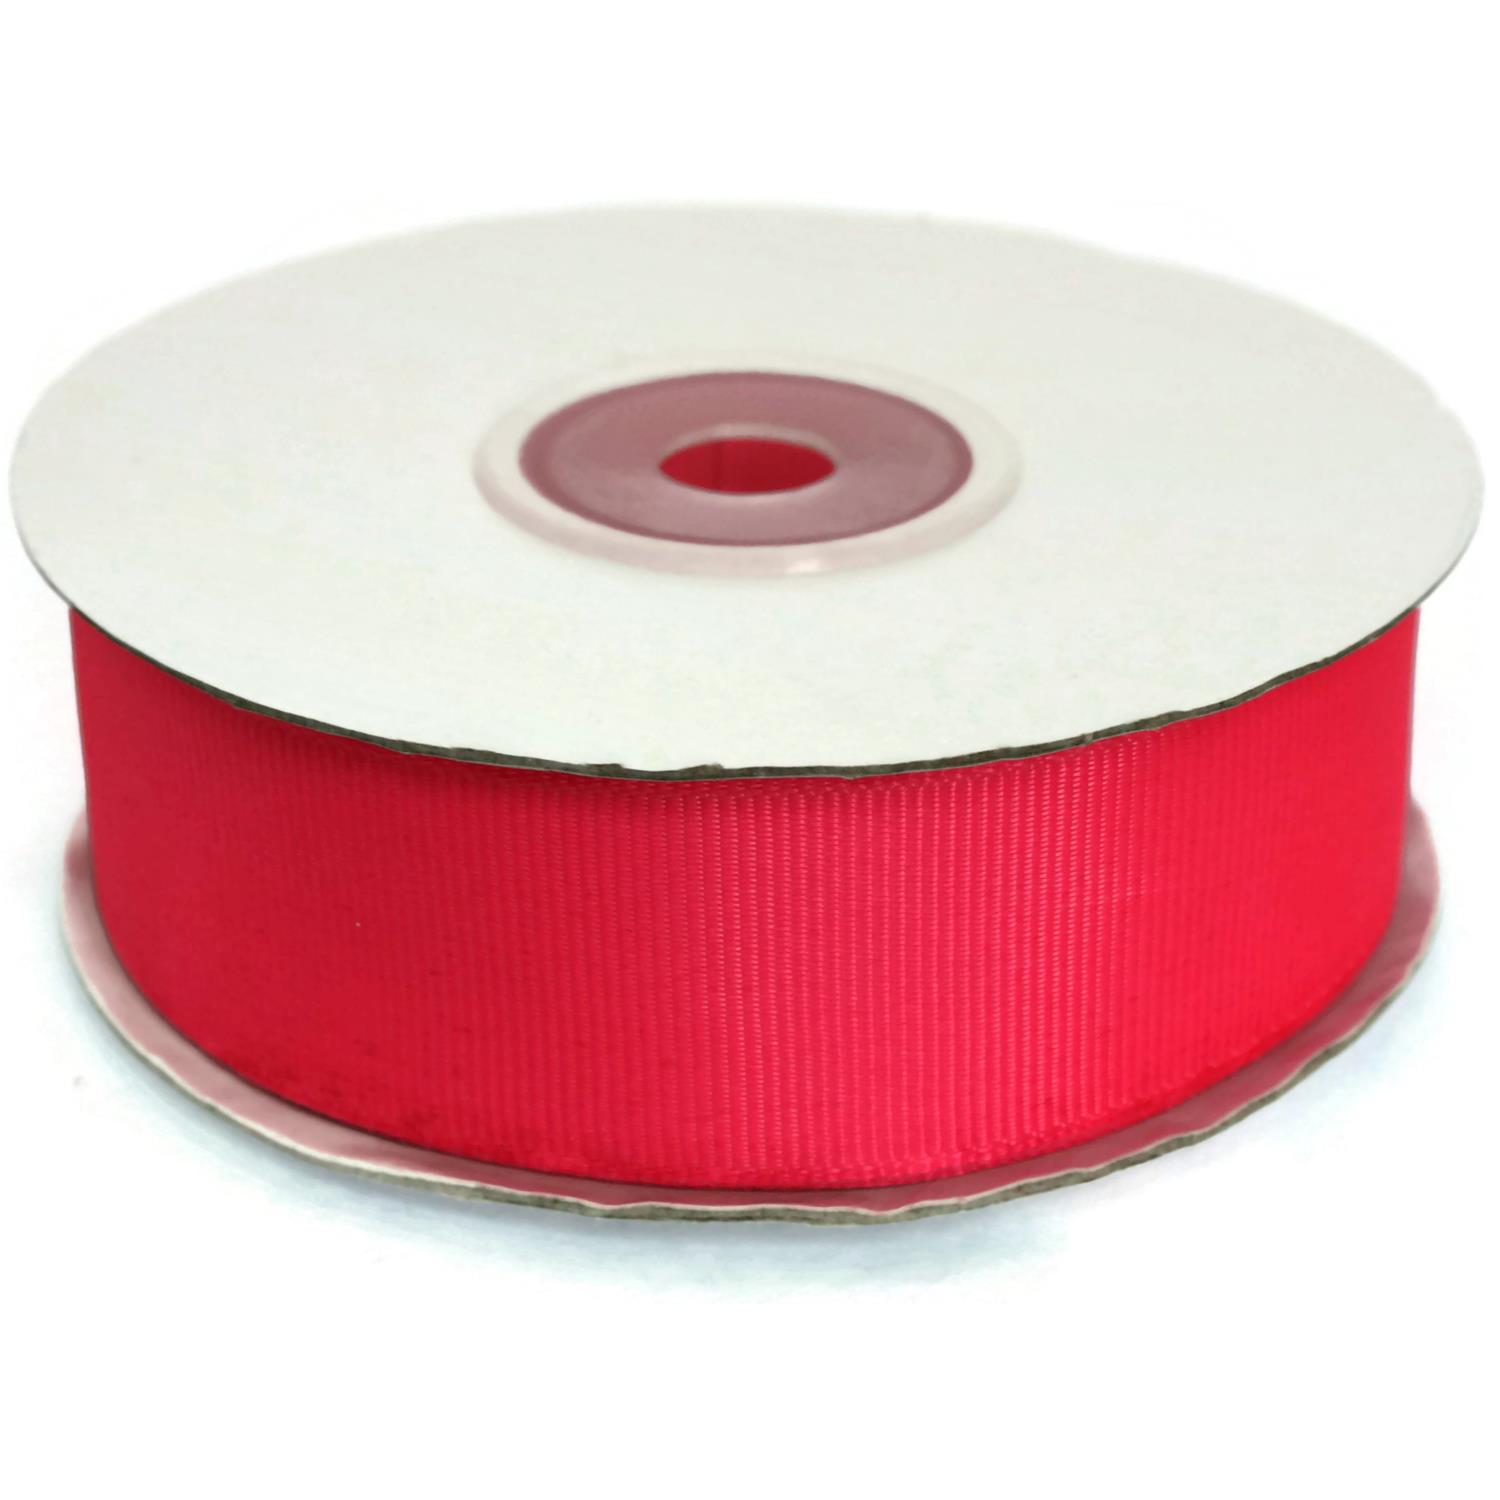 Ripsband 25mm breit, 20 Meter lang, Farbe: pink-himbeere #12